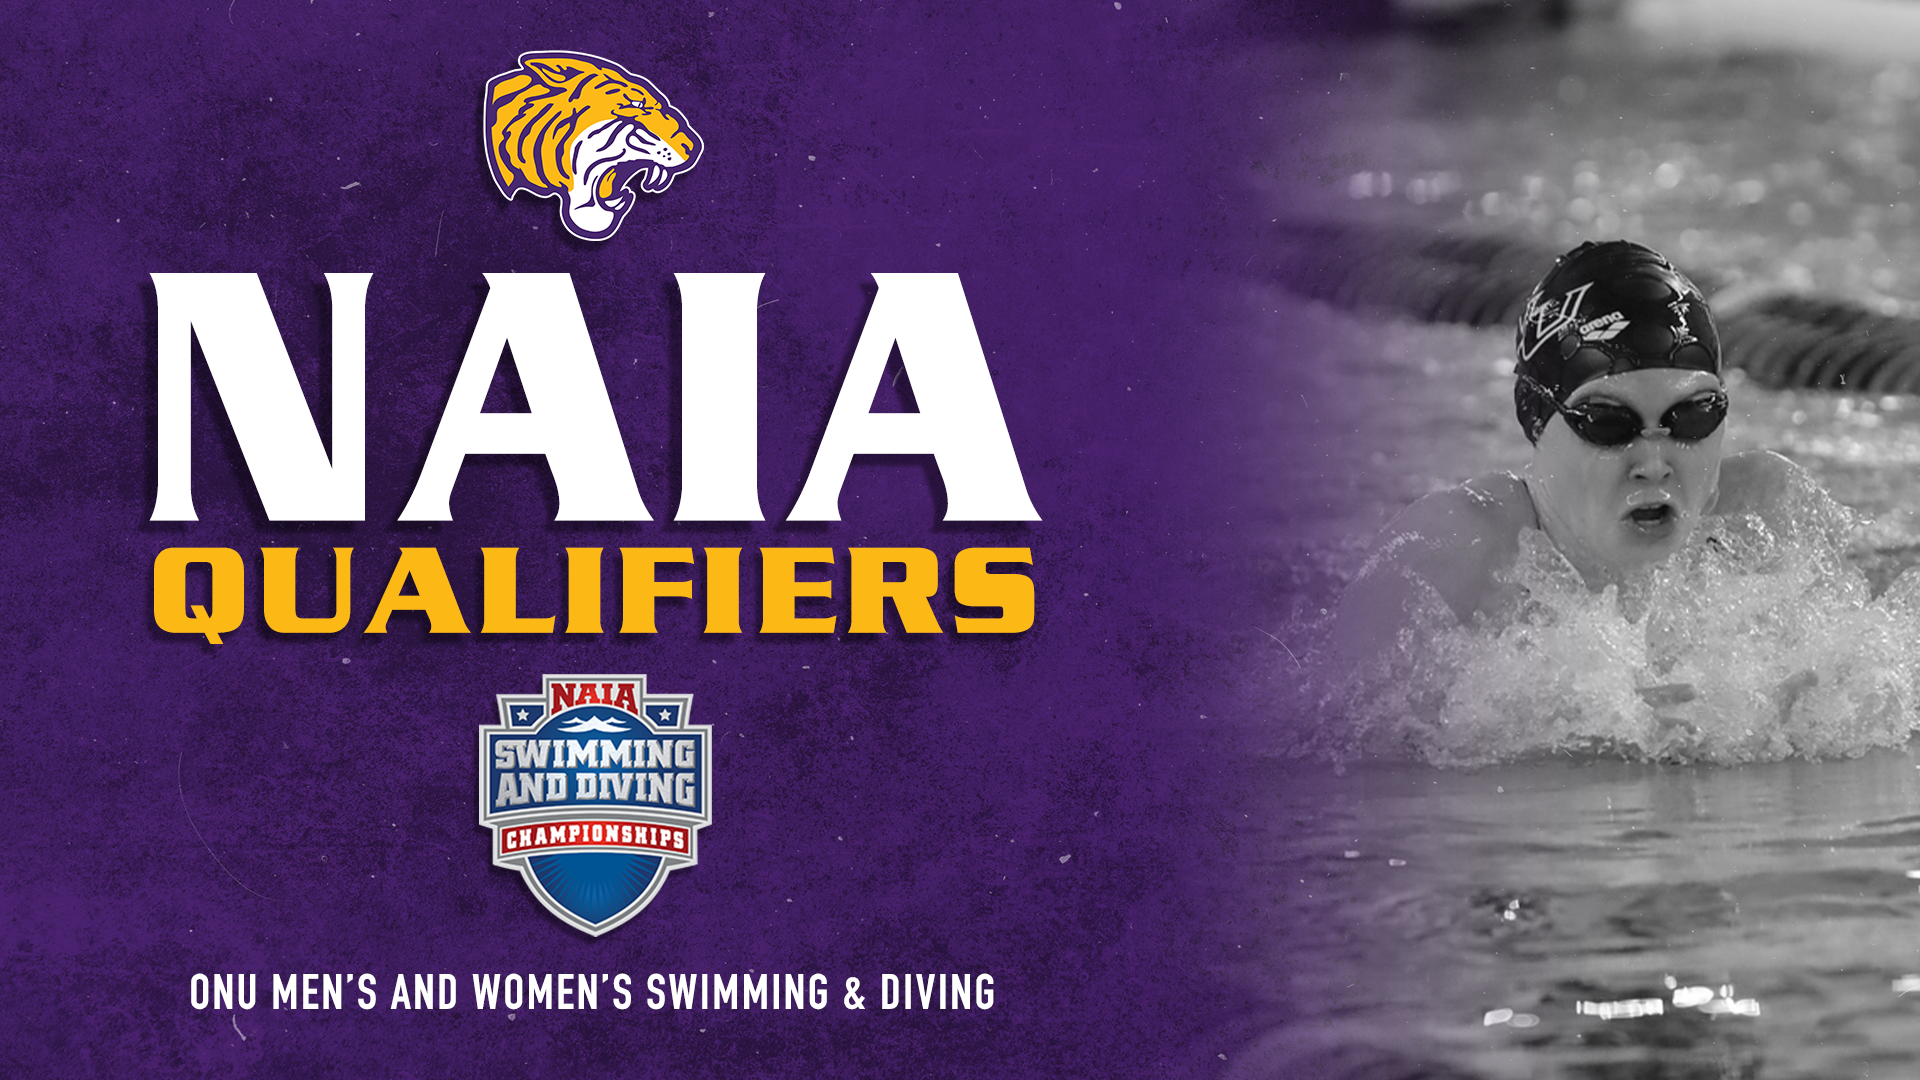 ONU QUALIFIERS ANNOUNCED FOR 2024 NAIA SWIM & DIVE NATIONALS